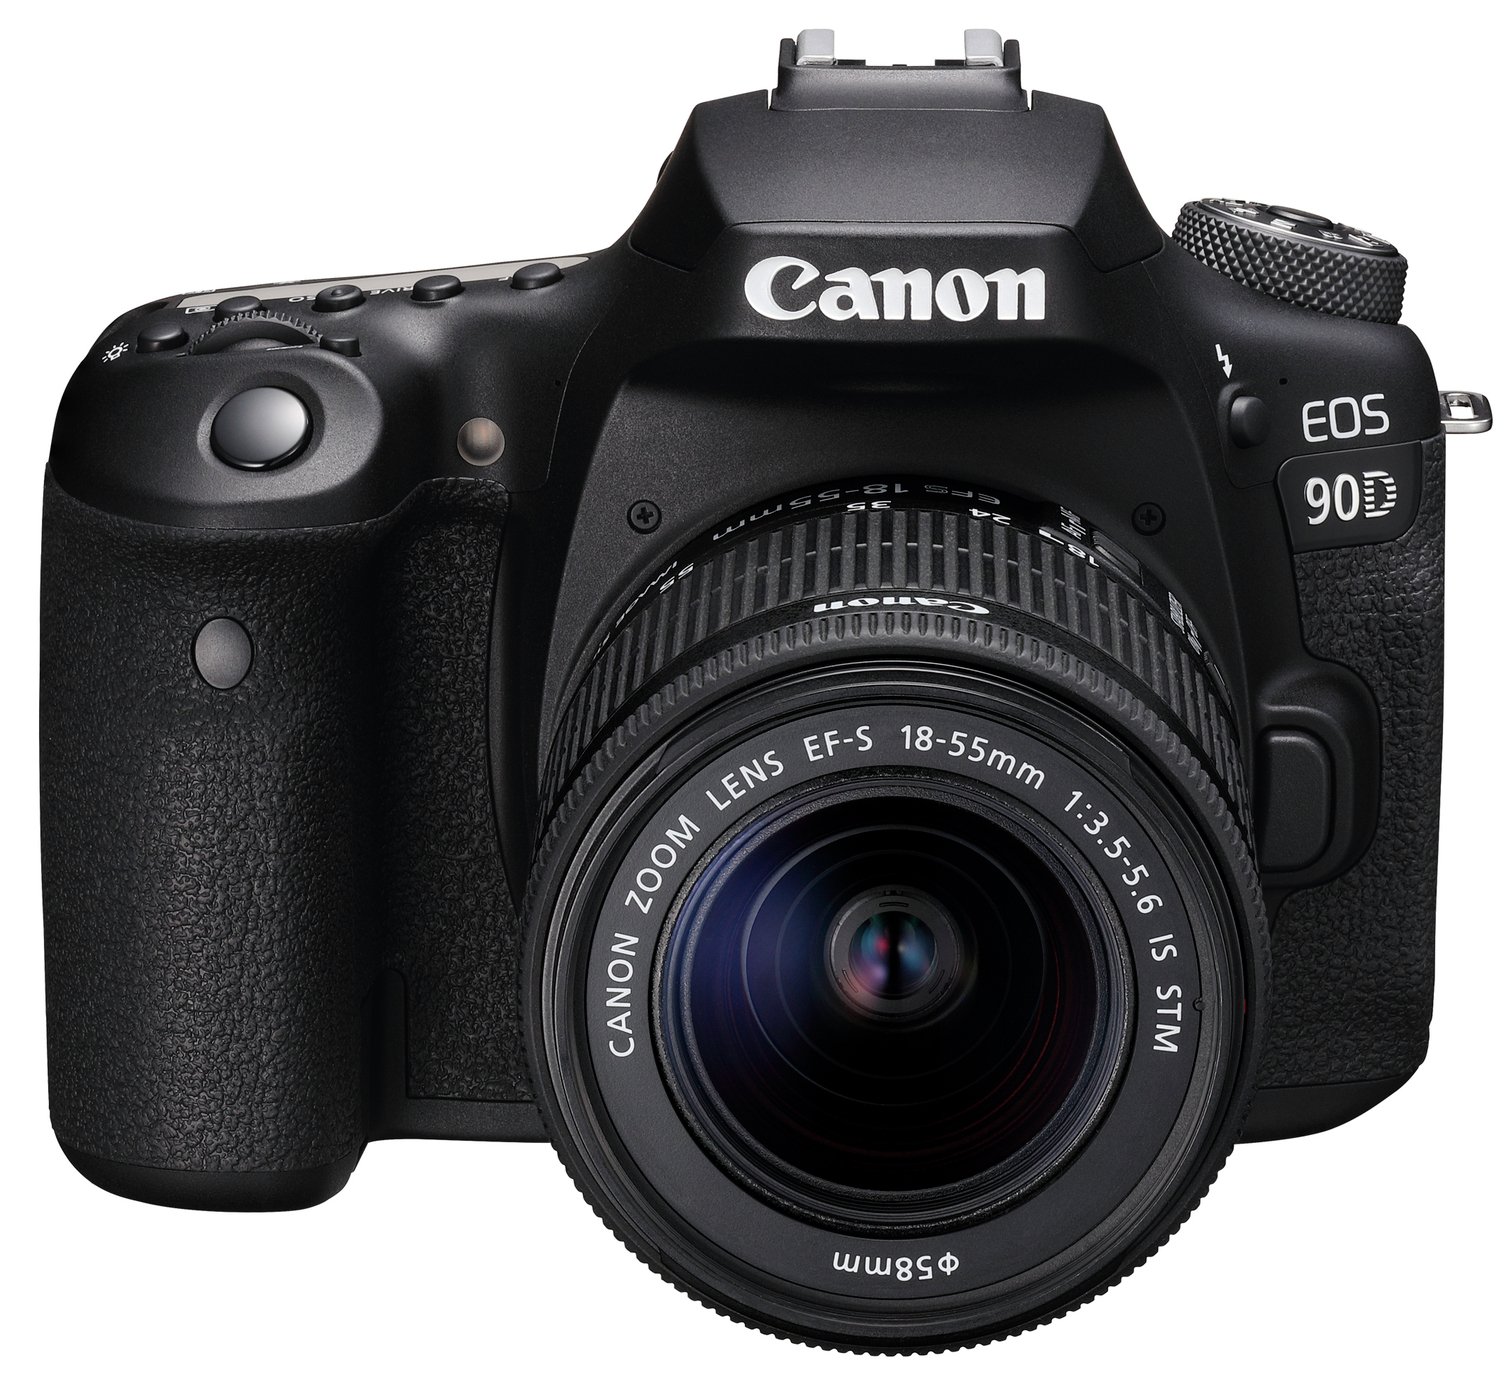 Canon EOS 90D DSLR Camera Body with 18-55mm Lens Review